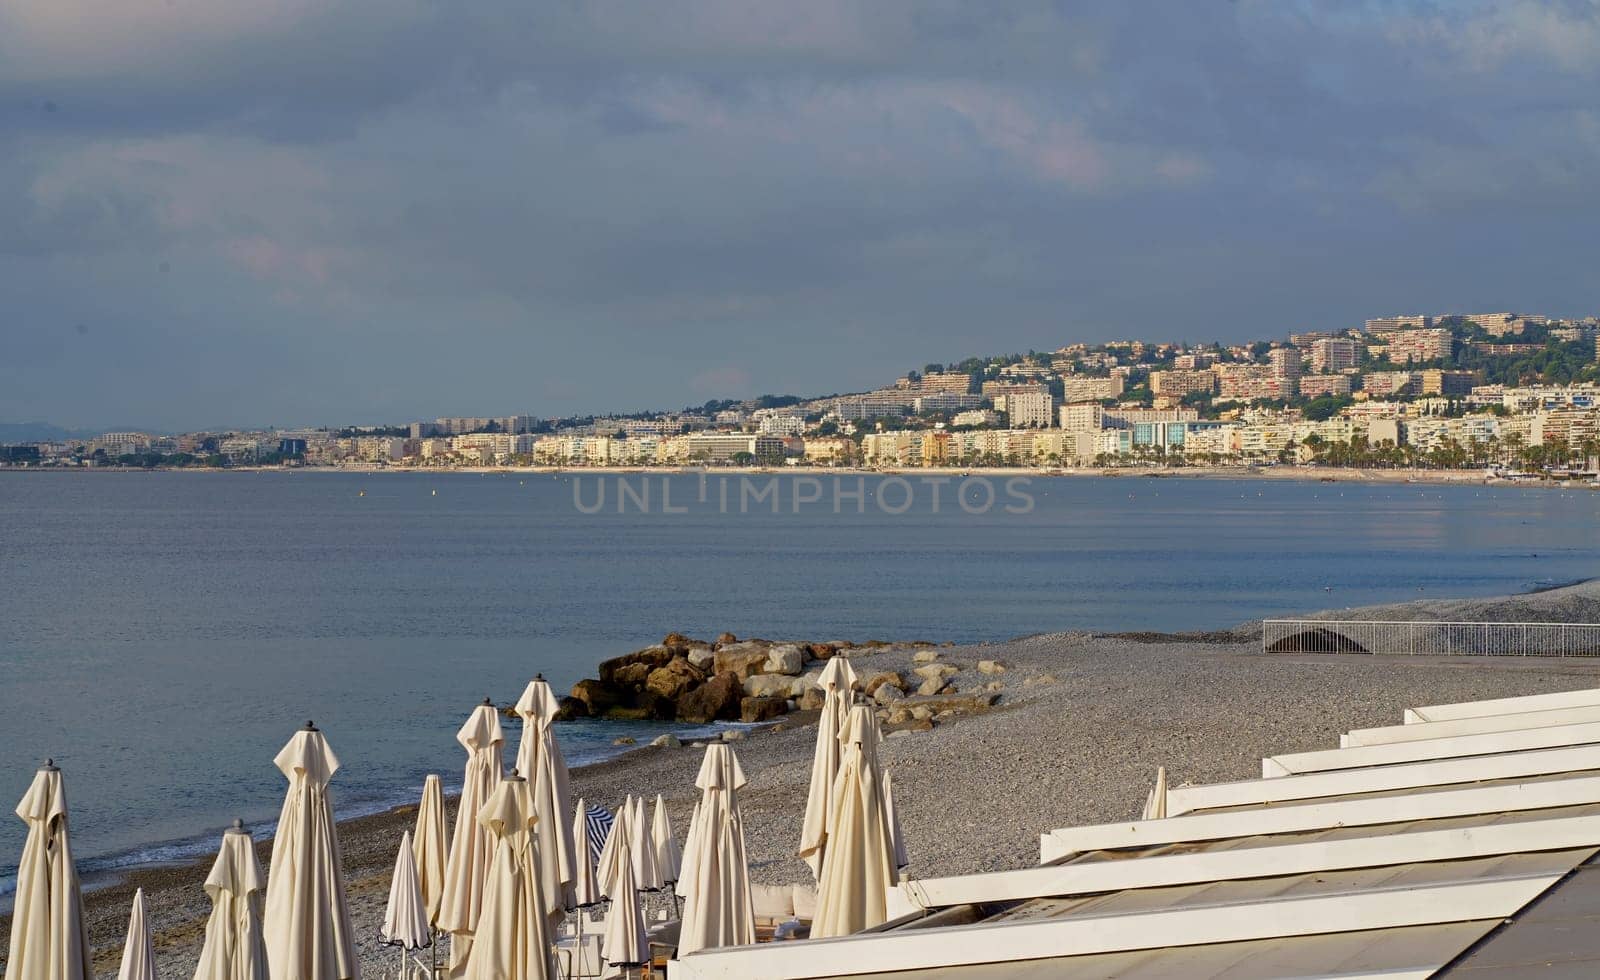 Early morning atmosphere and folded white umbrellas in Nice, France. White umbrellas on the beach against a blue clear sky. Panorama of the beach in Nice by aprilphoto